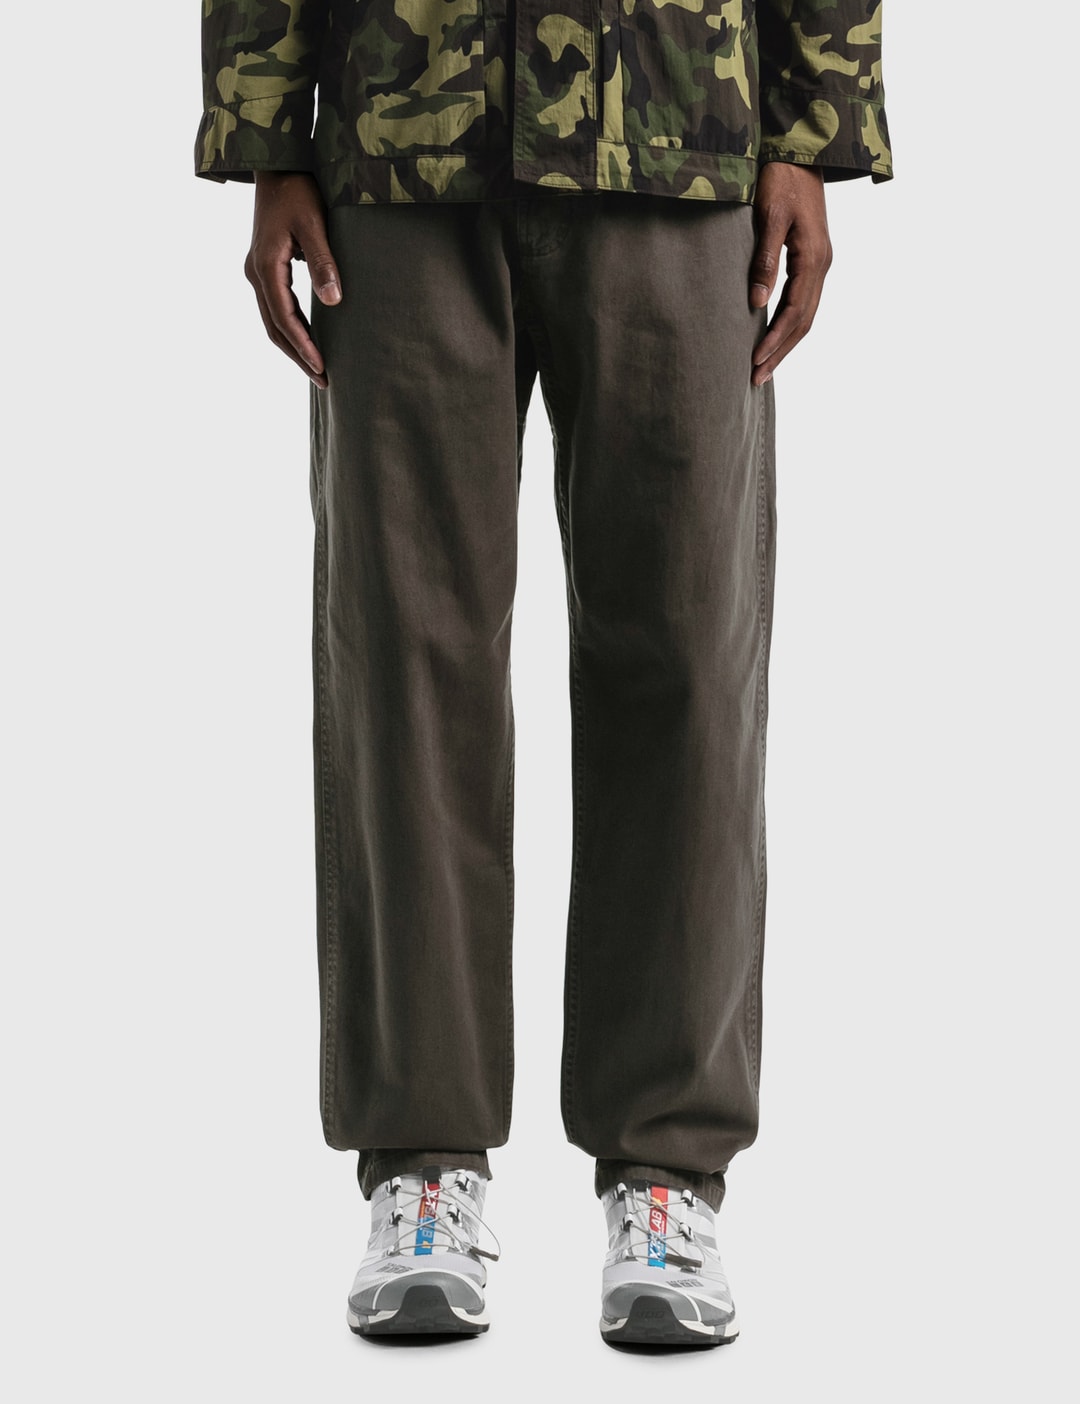 Gramicci - Gramicci Pants | HBX - Globally Curated Fashion and ...